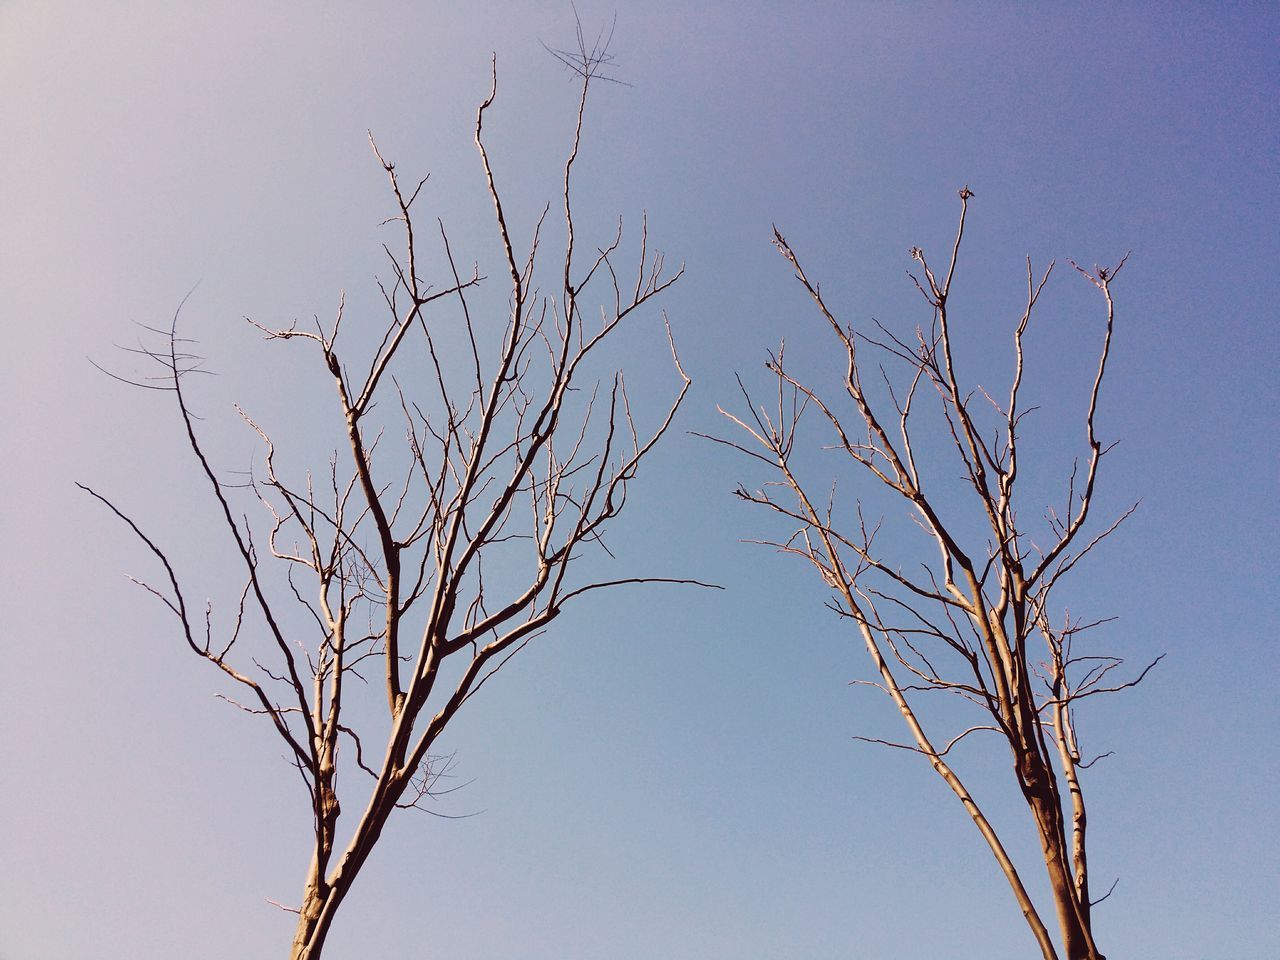 branch, bare tree, clear sky, low angle view, nature, tranquility, growth, tree, beauty in nature, sky, copy space, dead plant, twig, outdoors, no people, dry, plant, day, dried plant, scenics